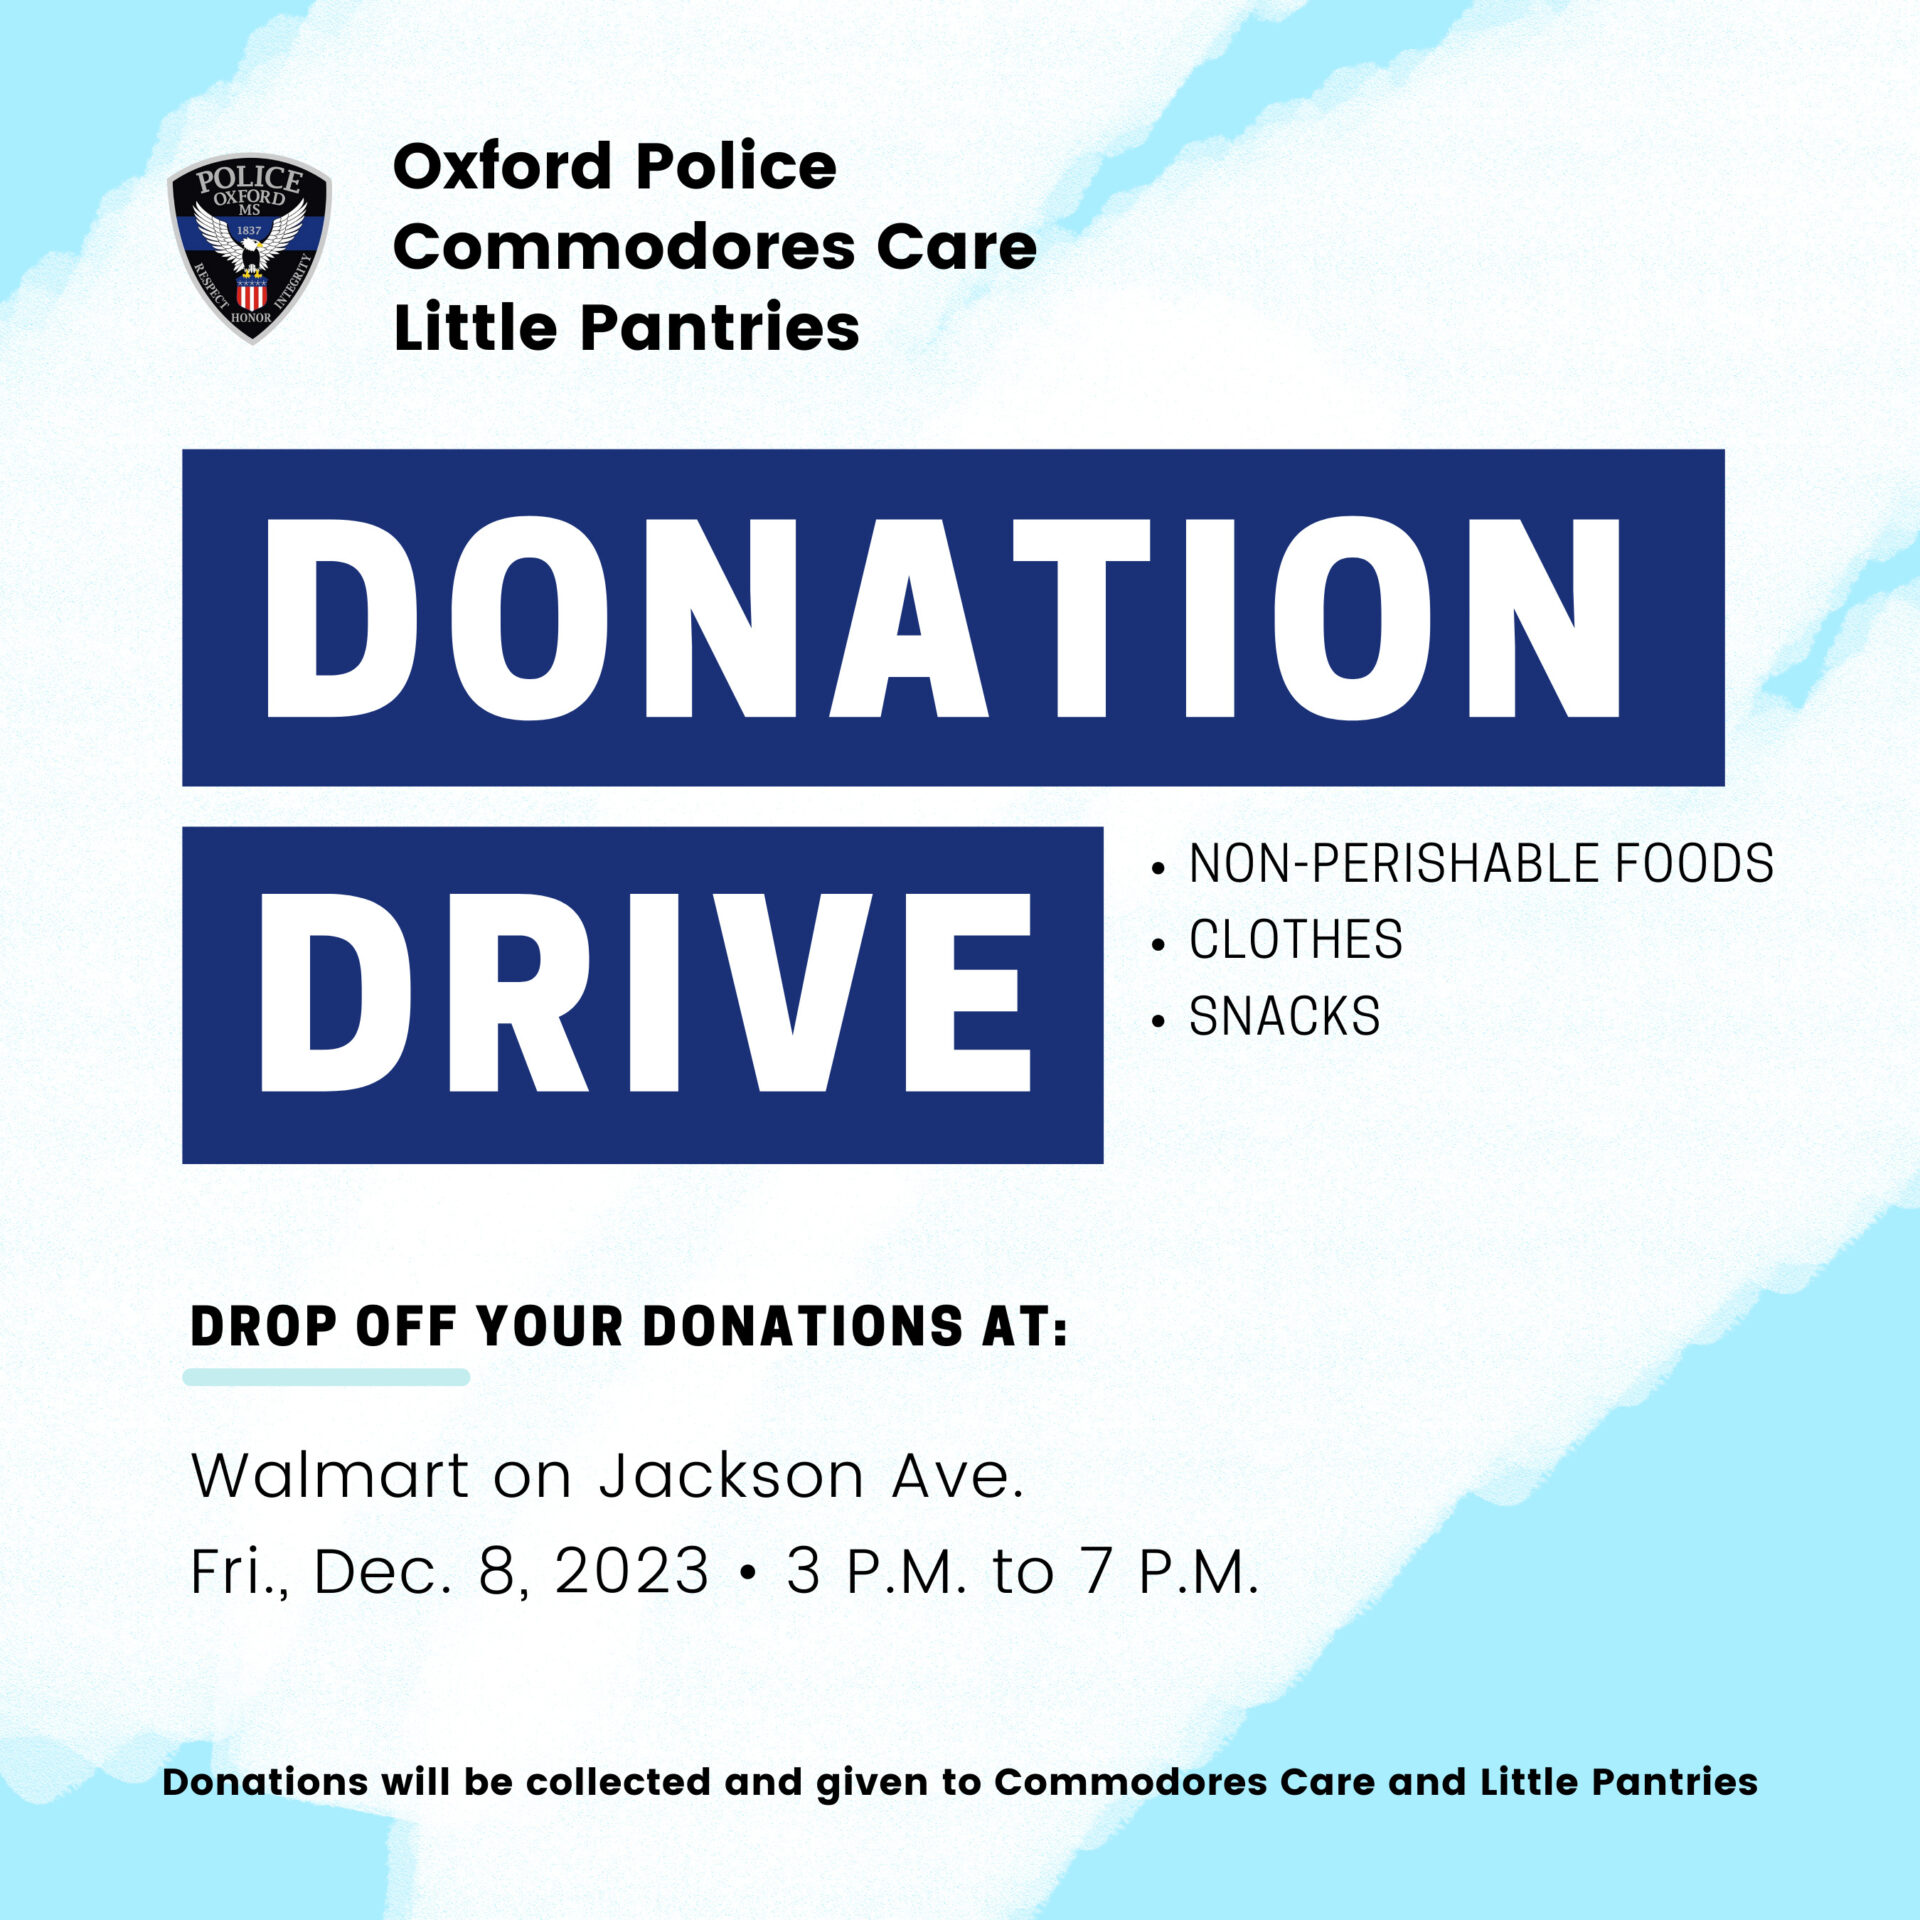 OPD Collecting Donations for Commodores Care, Little Pantries on